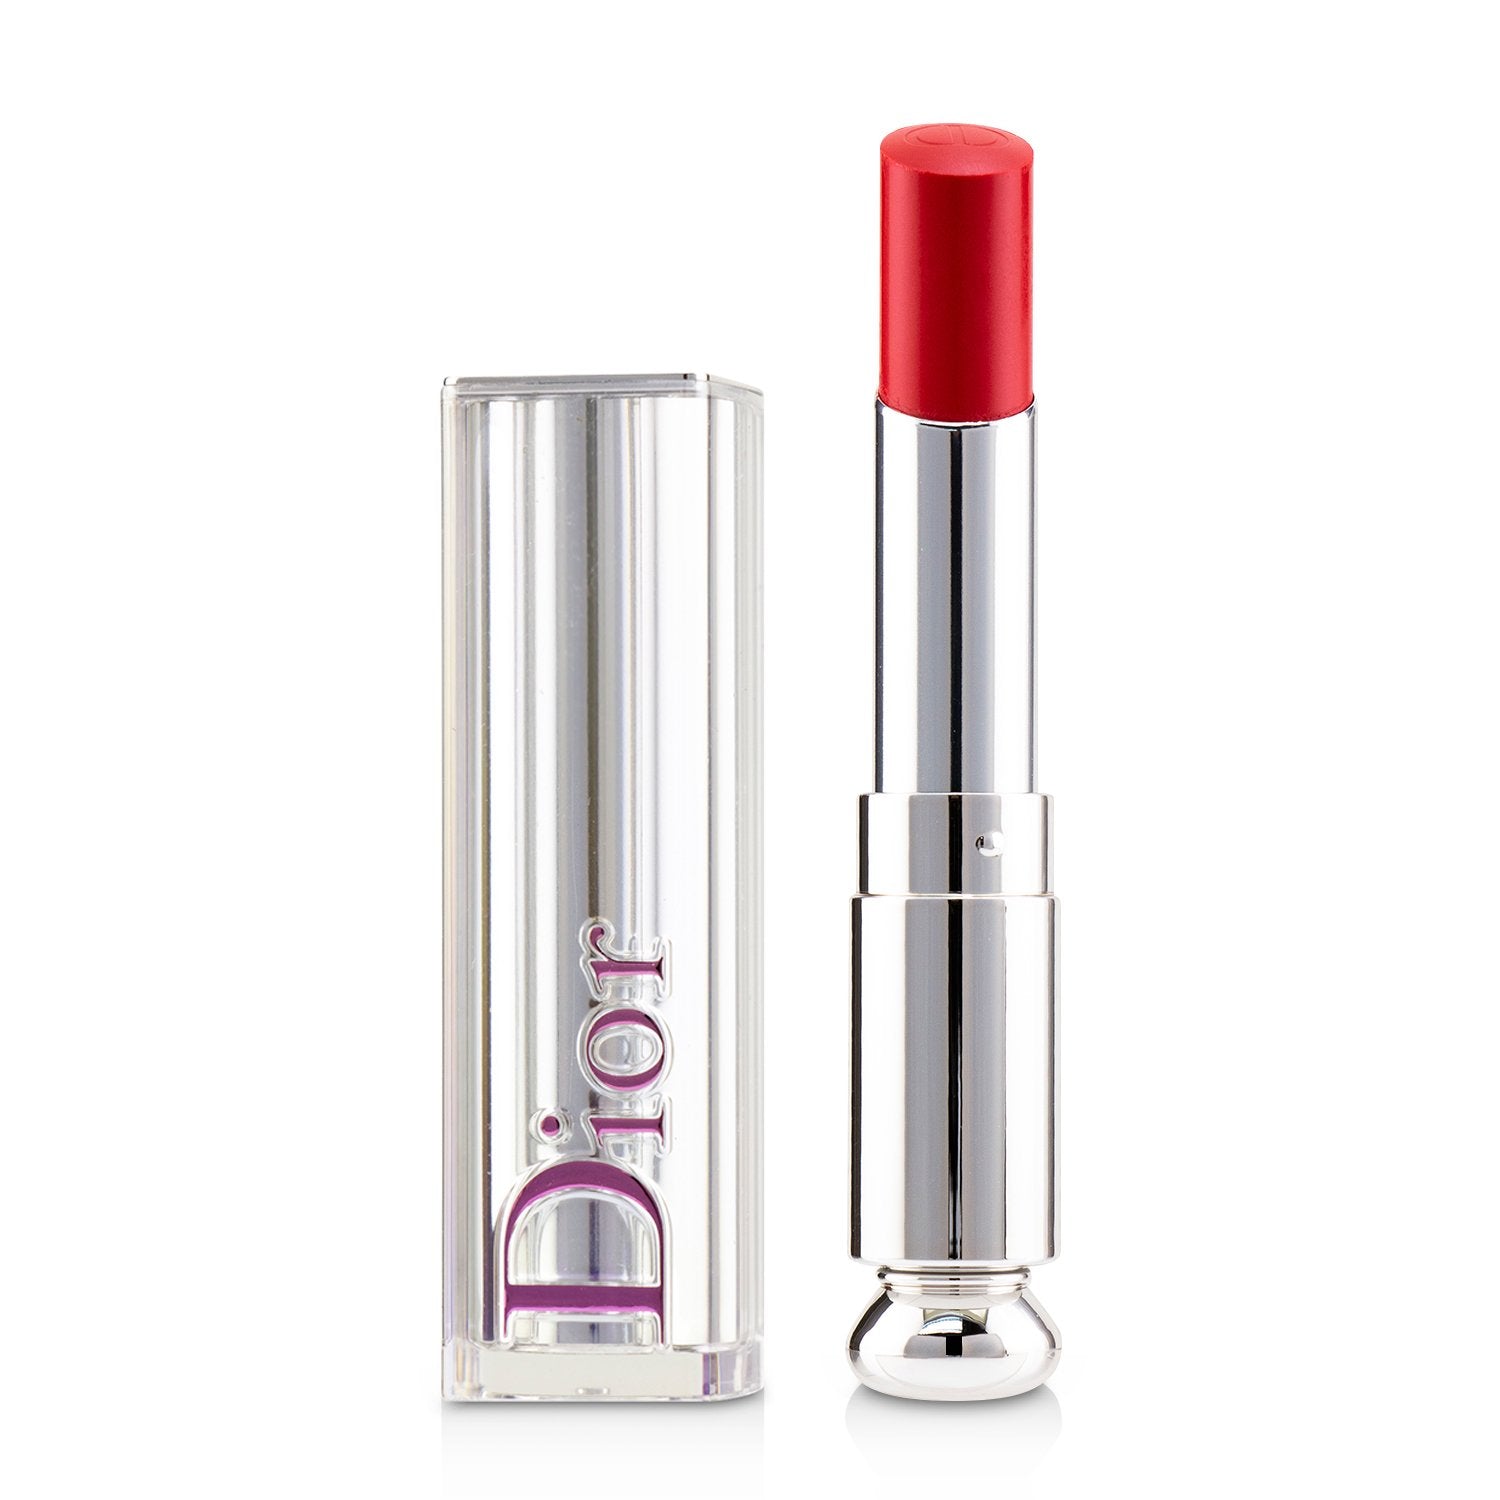 Chanel - Rouge Coco Baume Hydrating Beautifying Tinted Lip Balm 3g/0.1oz -  Lip Color, Free Worldwide Shipping